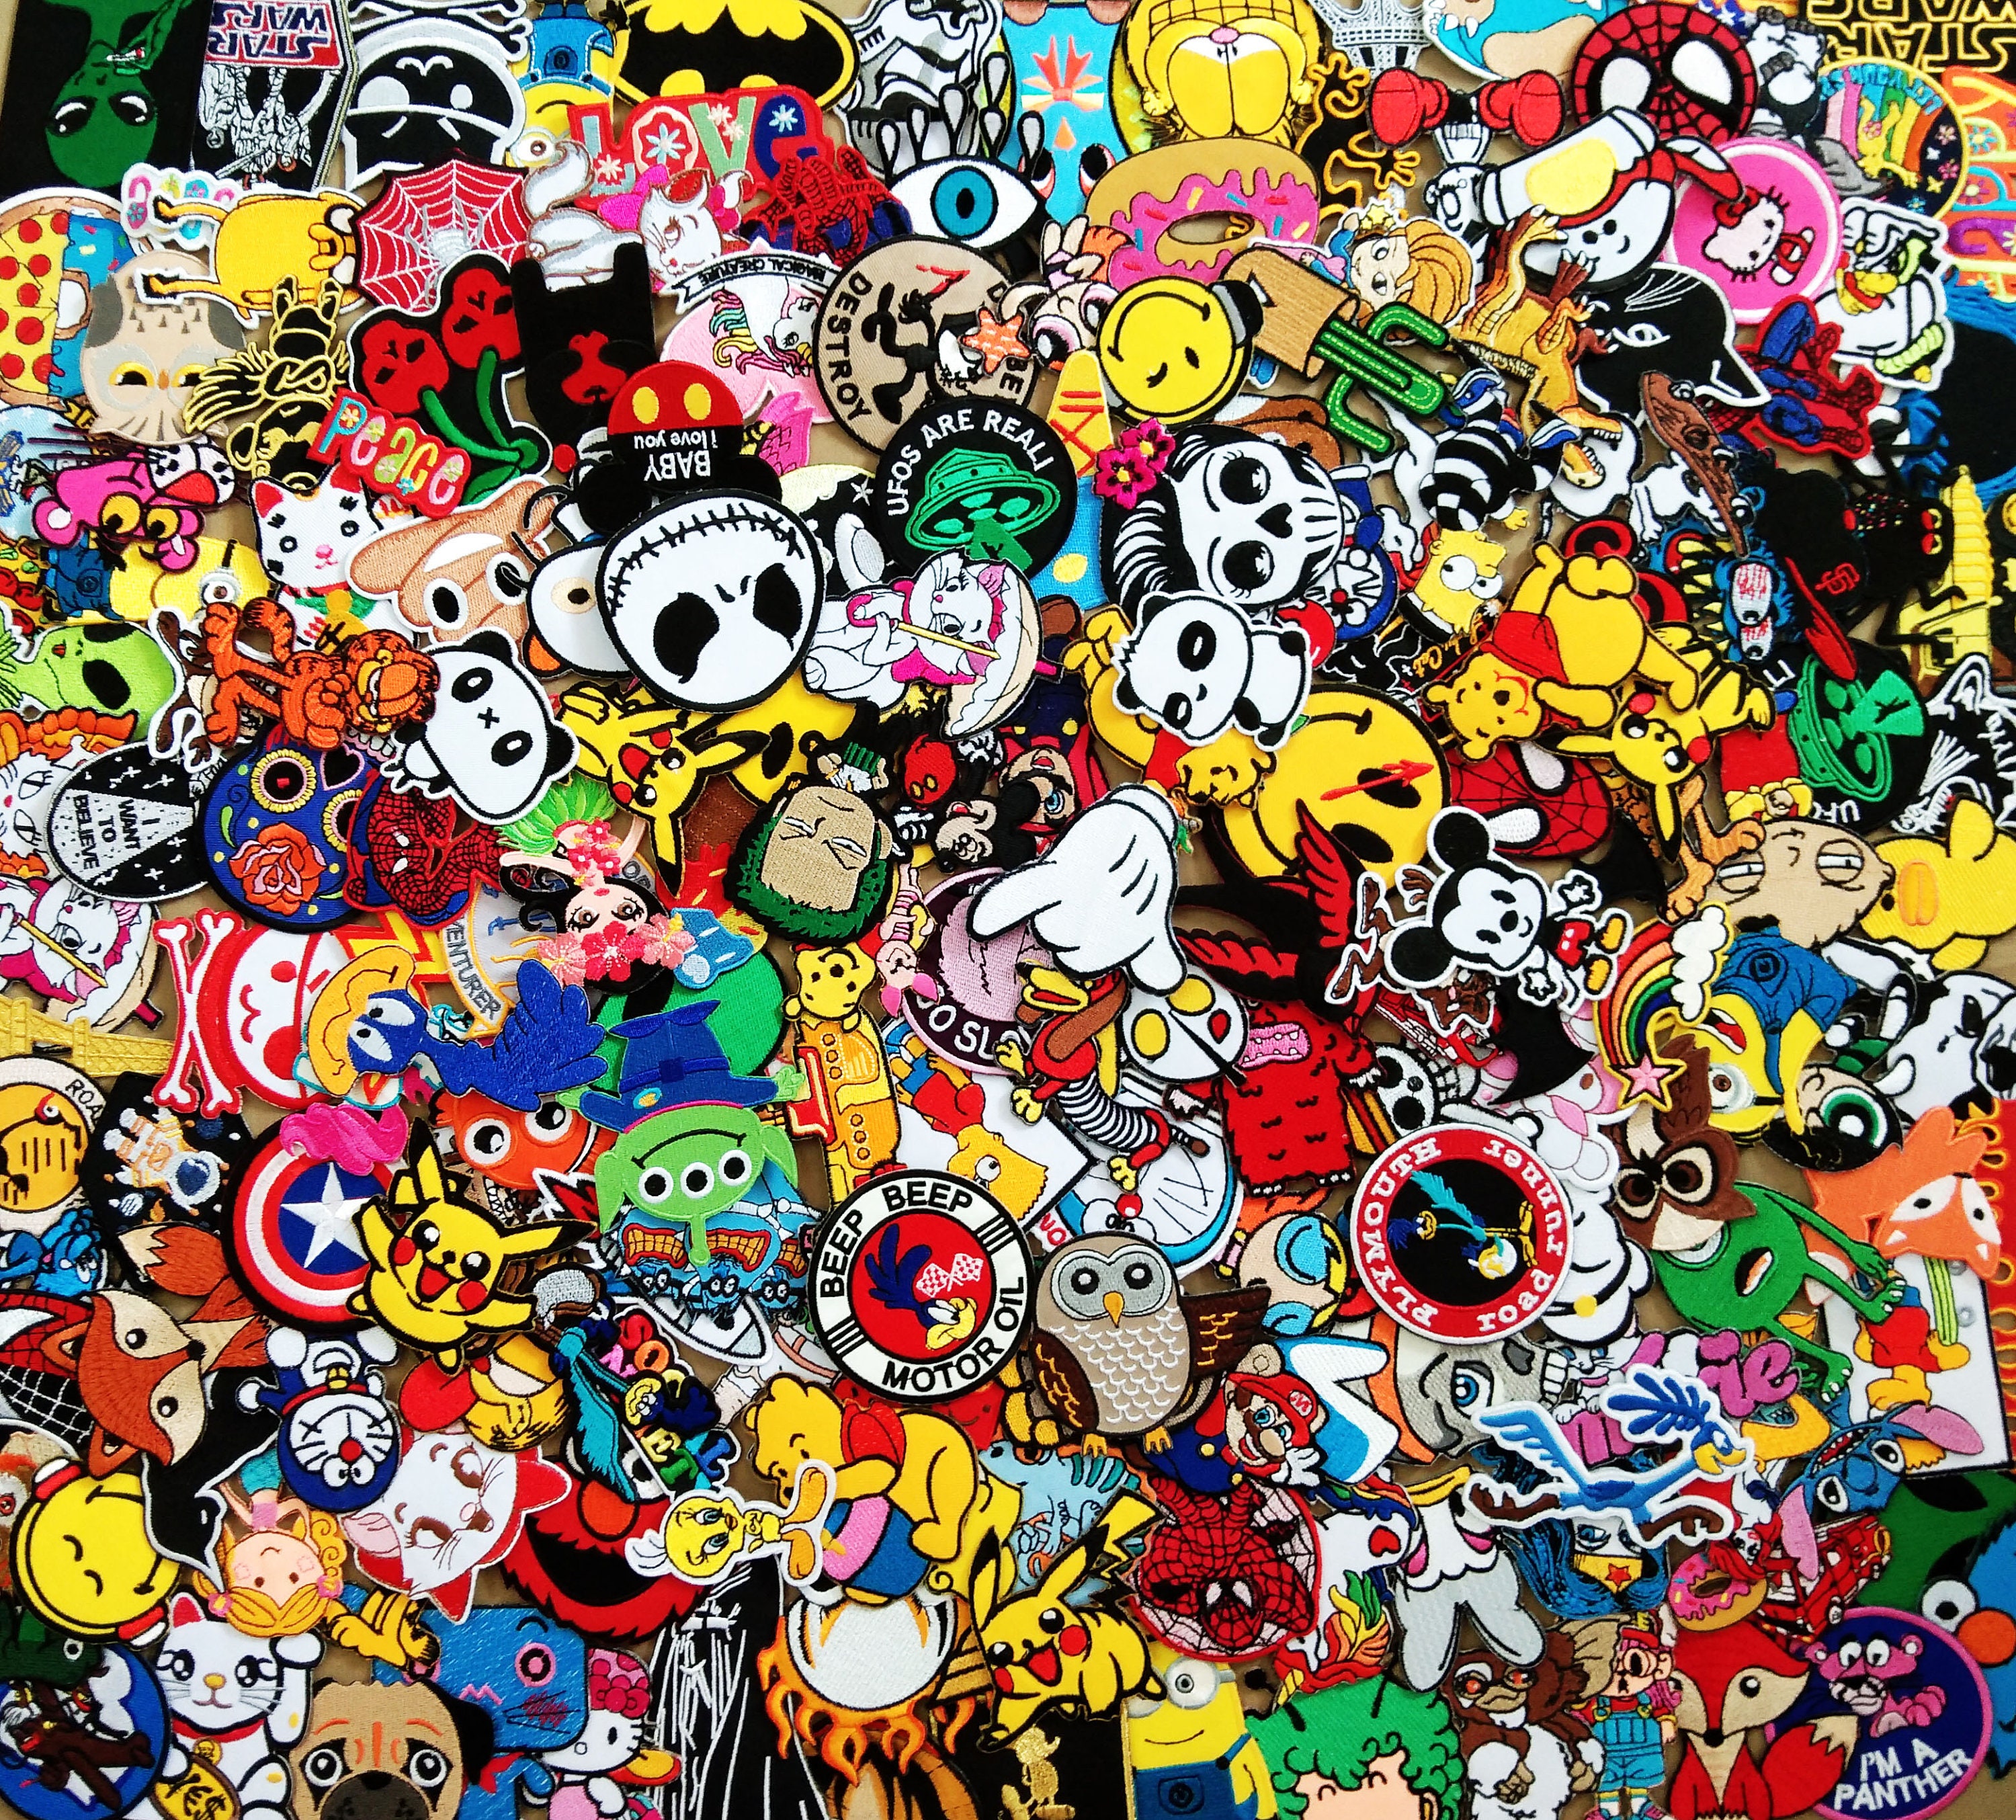 Wholesale marvel patches For Custom Made Clothes 